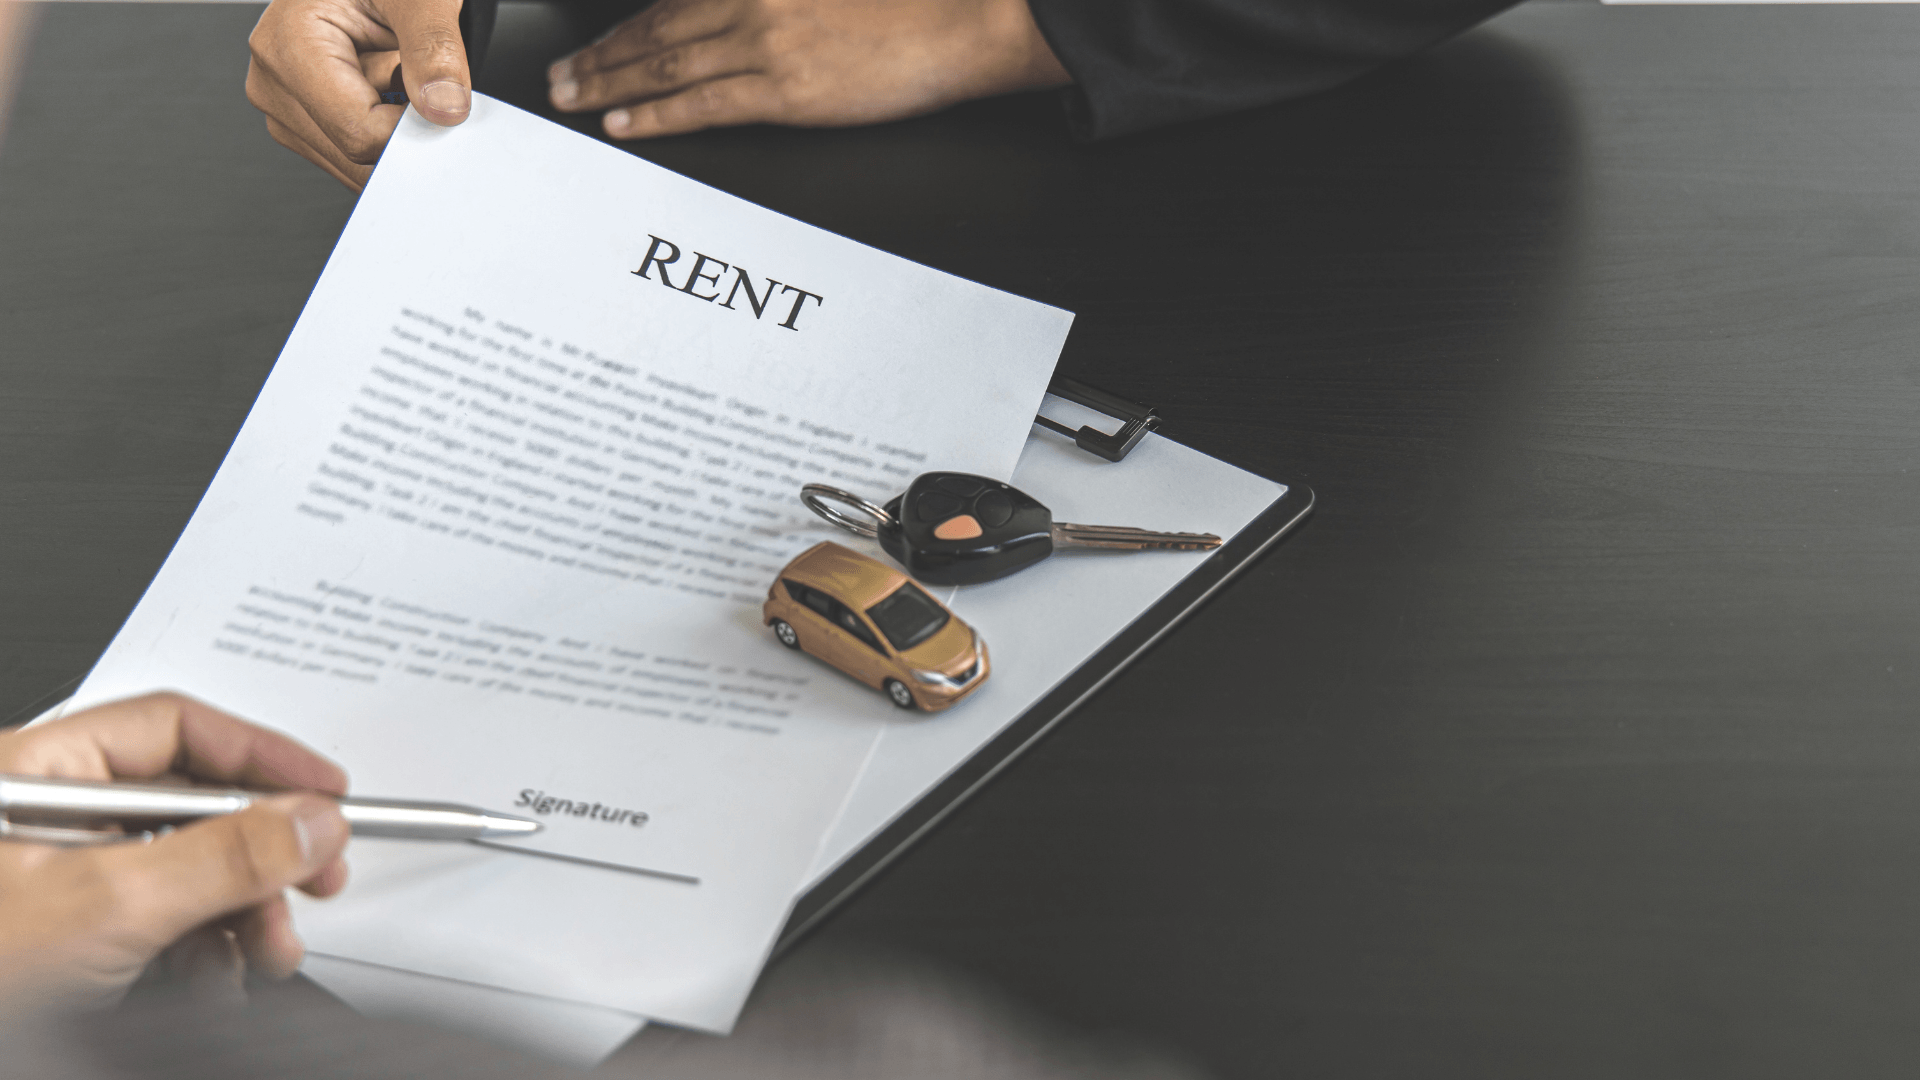 Rental Property Contract